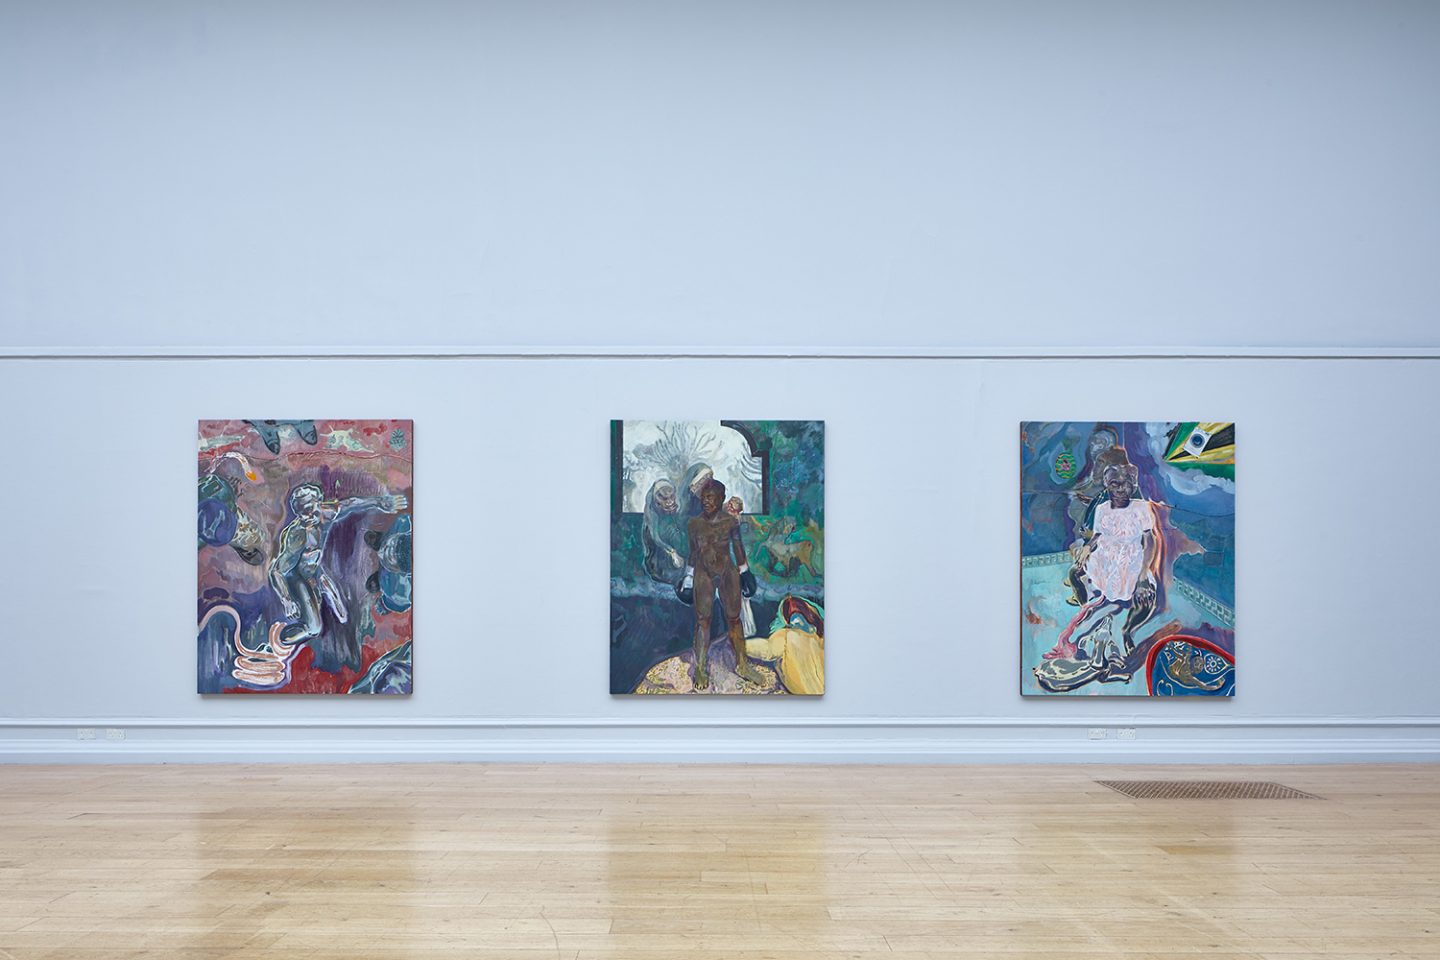 Michael Armitage, The Chapel, installation view at the South London Gallery, 2017. Photo Andy Stagg
